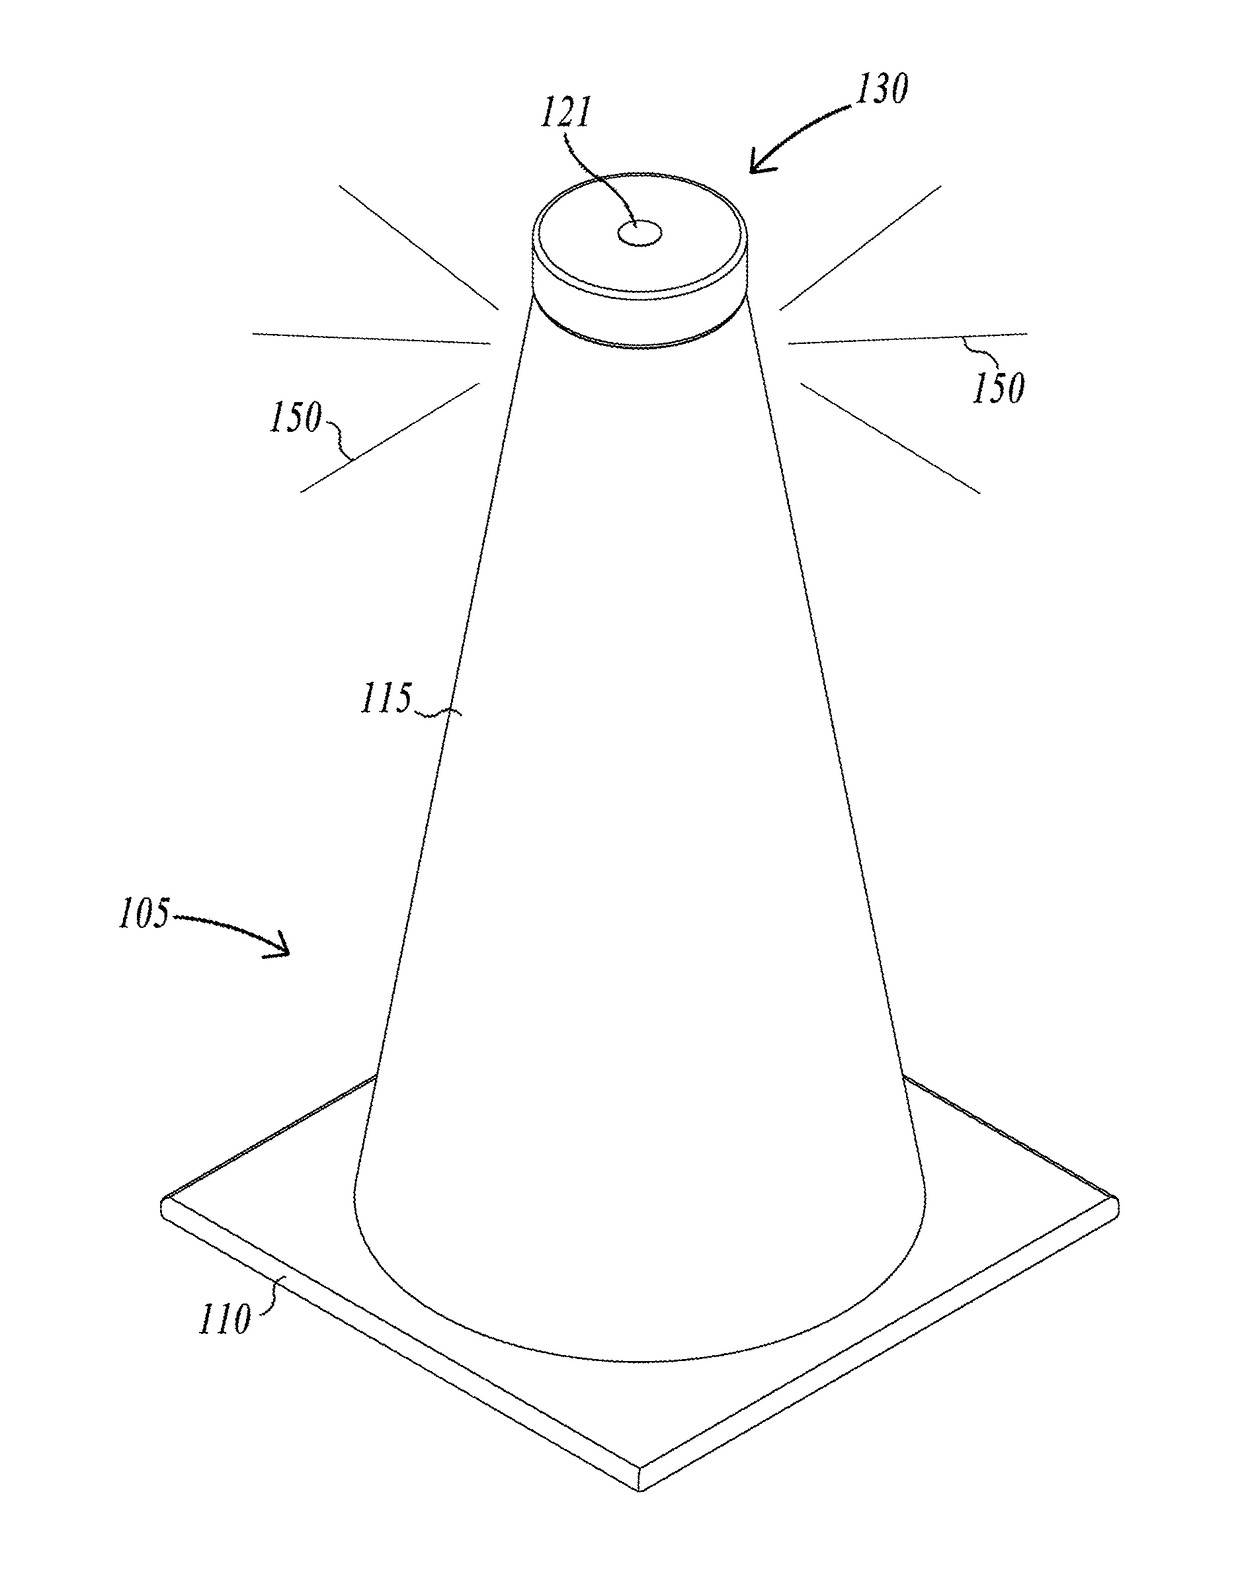 Safety cone with controlled illumination